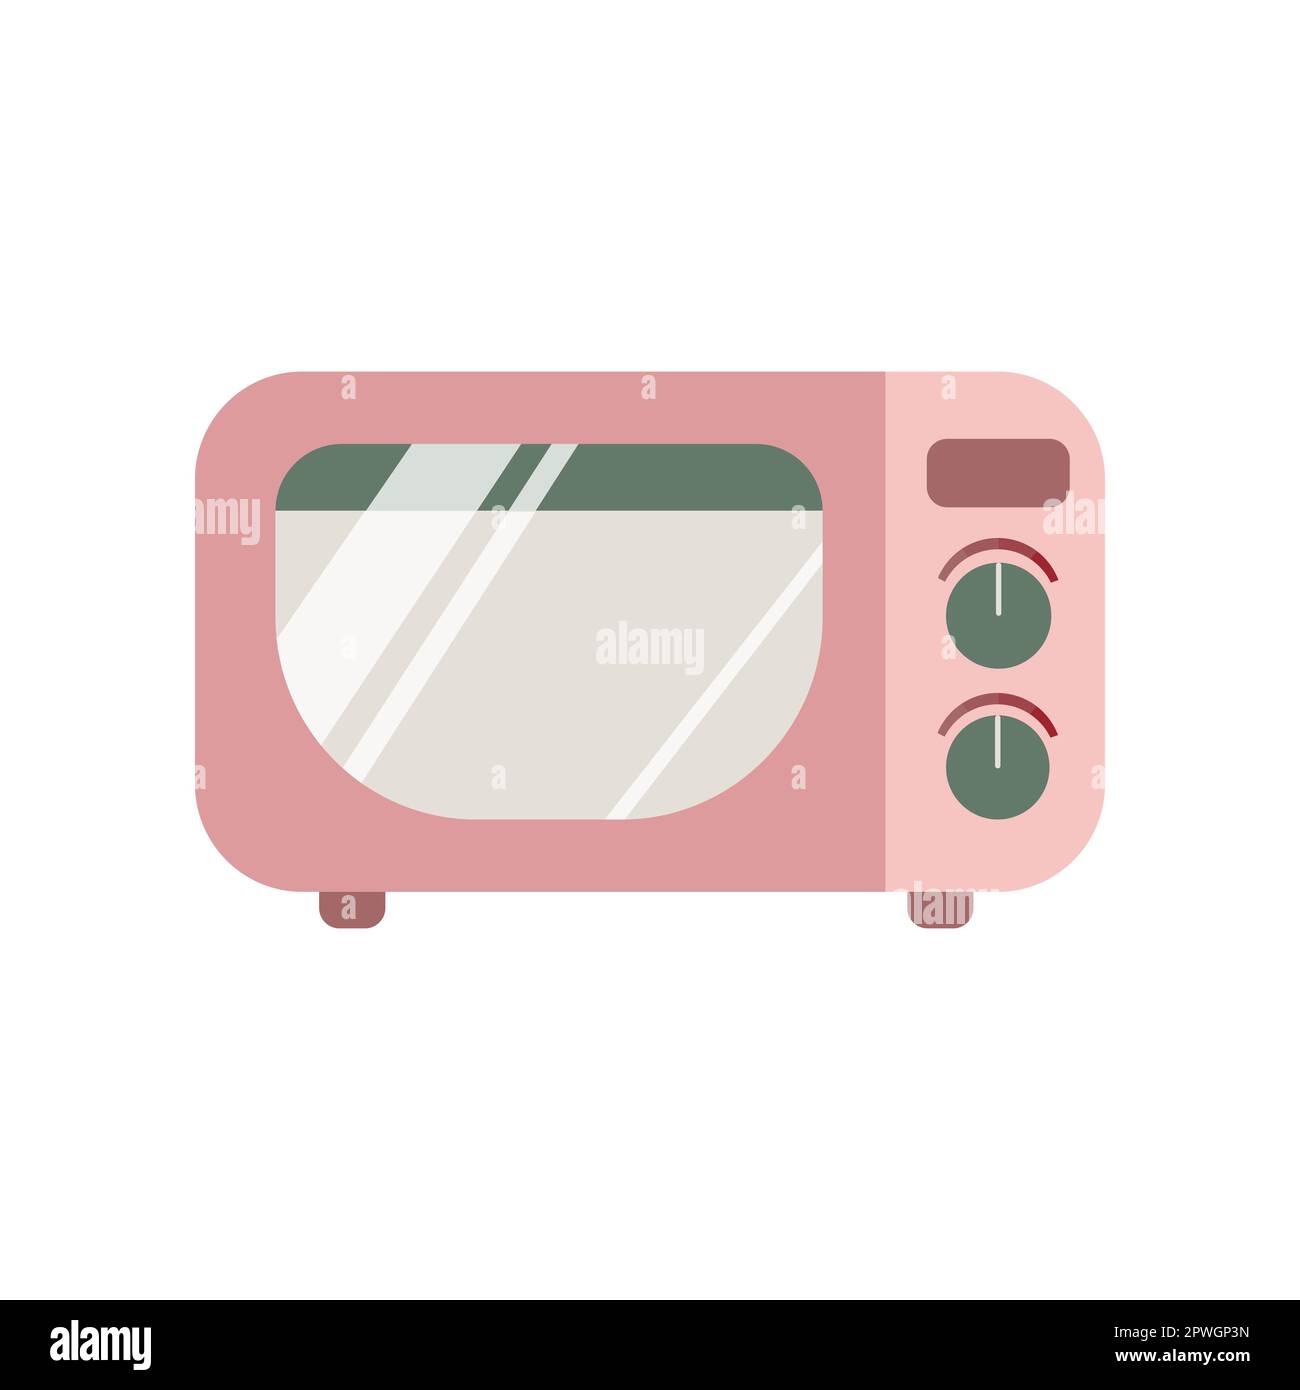 Cute Microwave Oven, Illustration, Vector Stock Vector